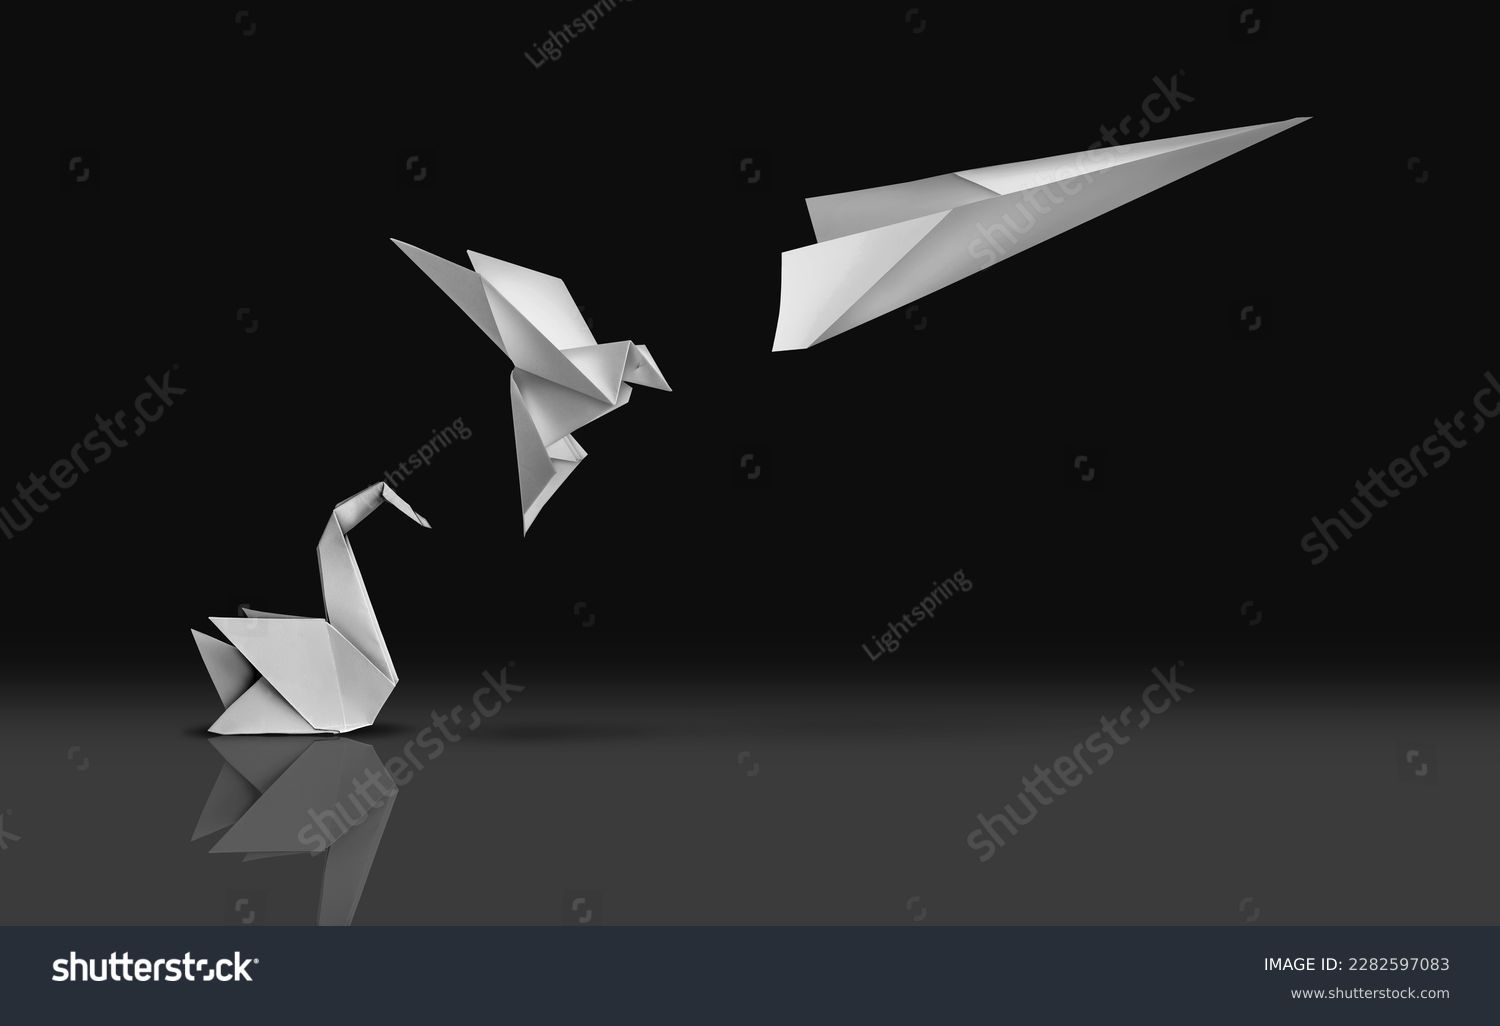 Change For Advancement and Success transformation or improving as a leadership in business through innovation and evolution concept with paper origami changed for more speed. #2282597083